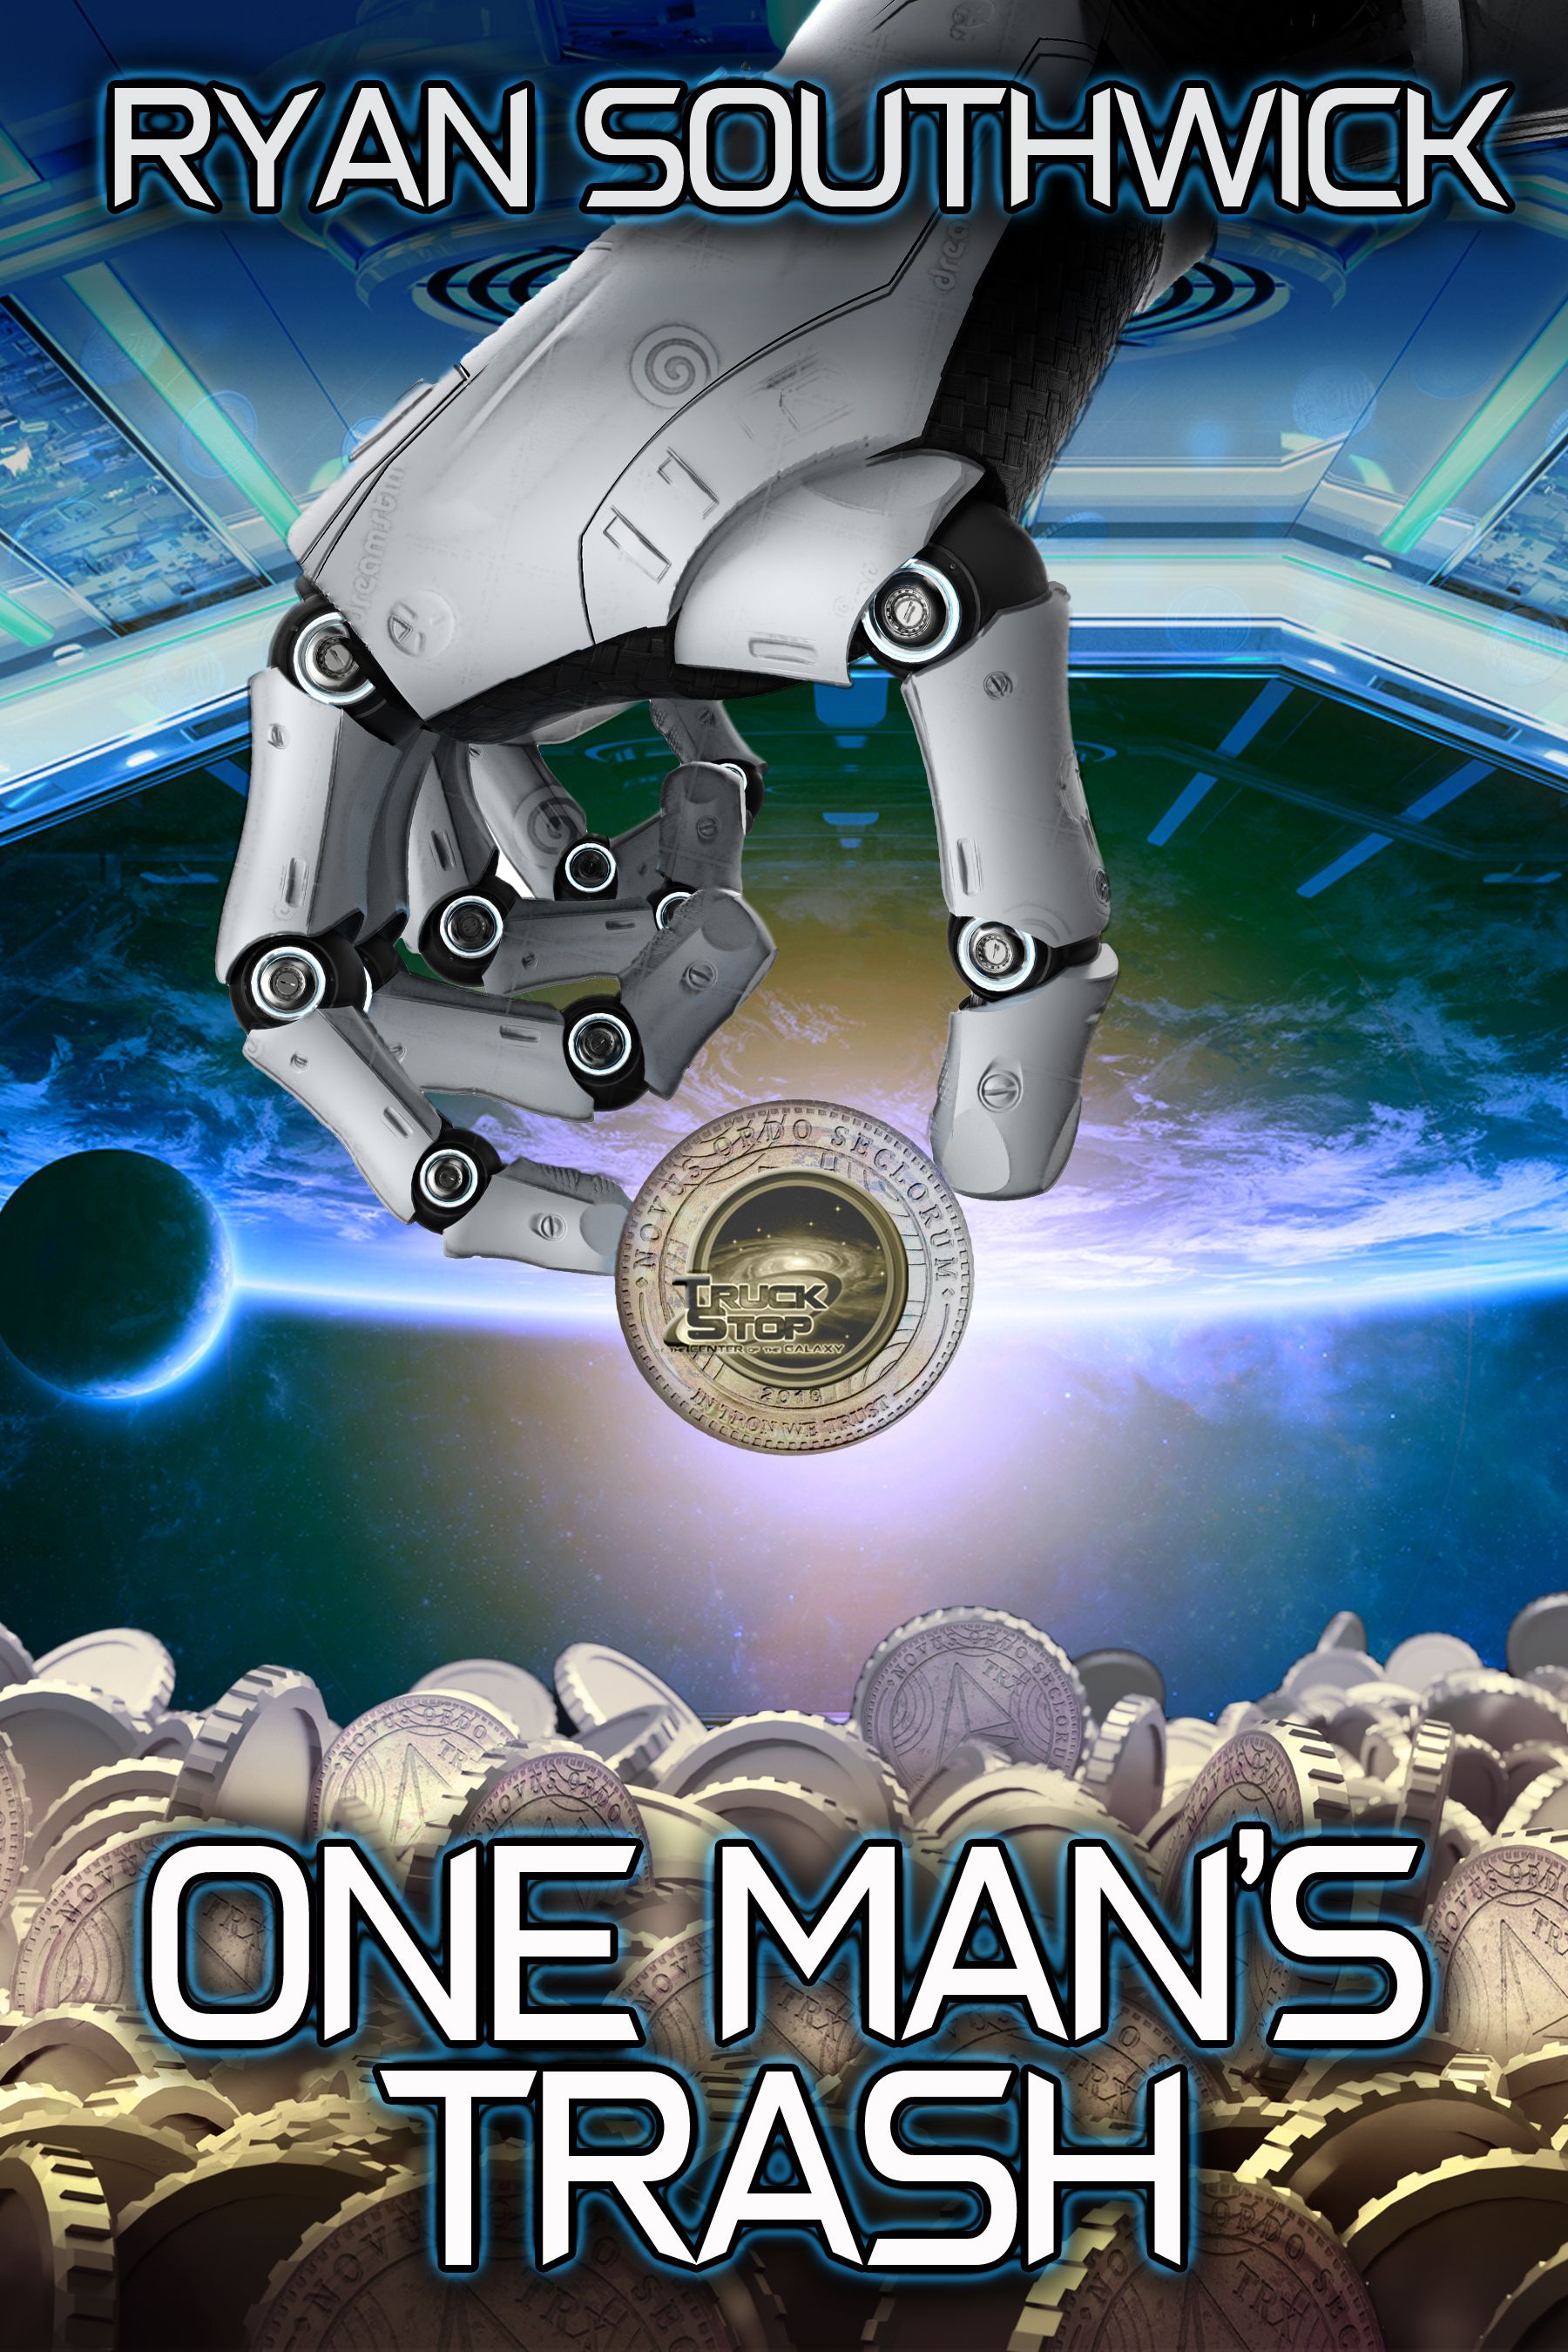 Mechanical hand grabbing a coin over a pile of coins. Earth in the background.